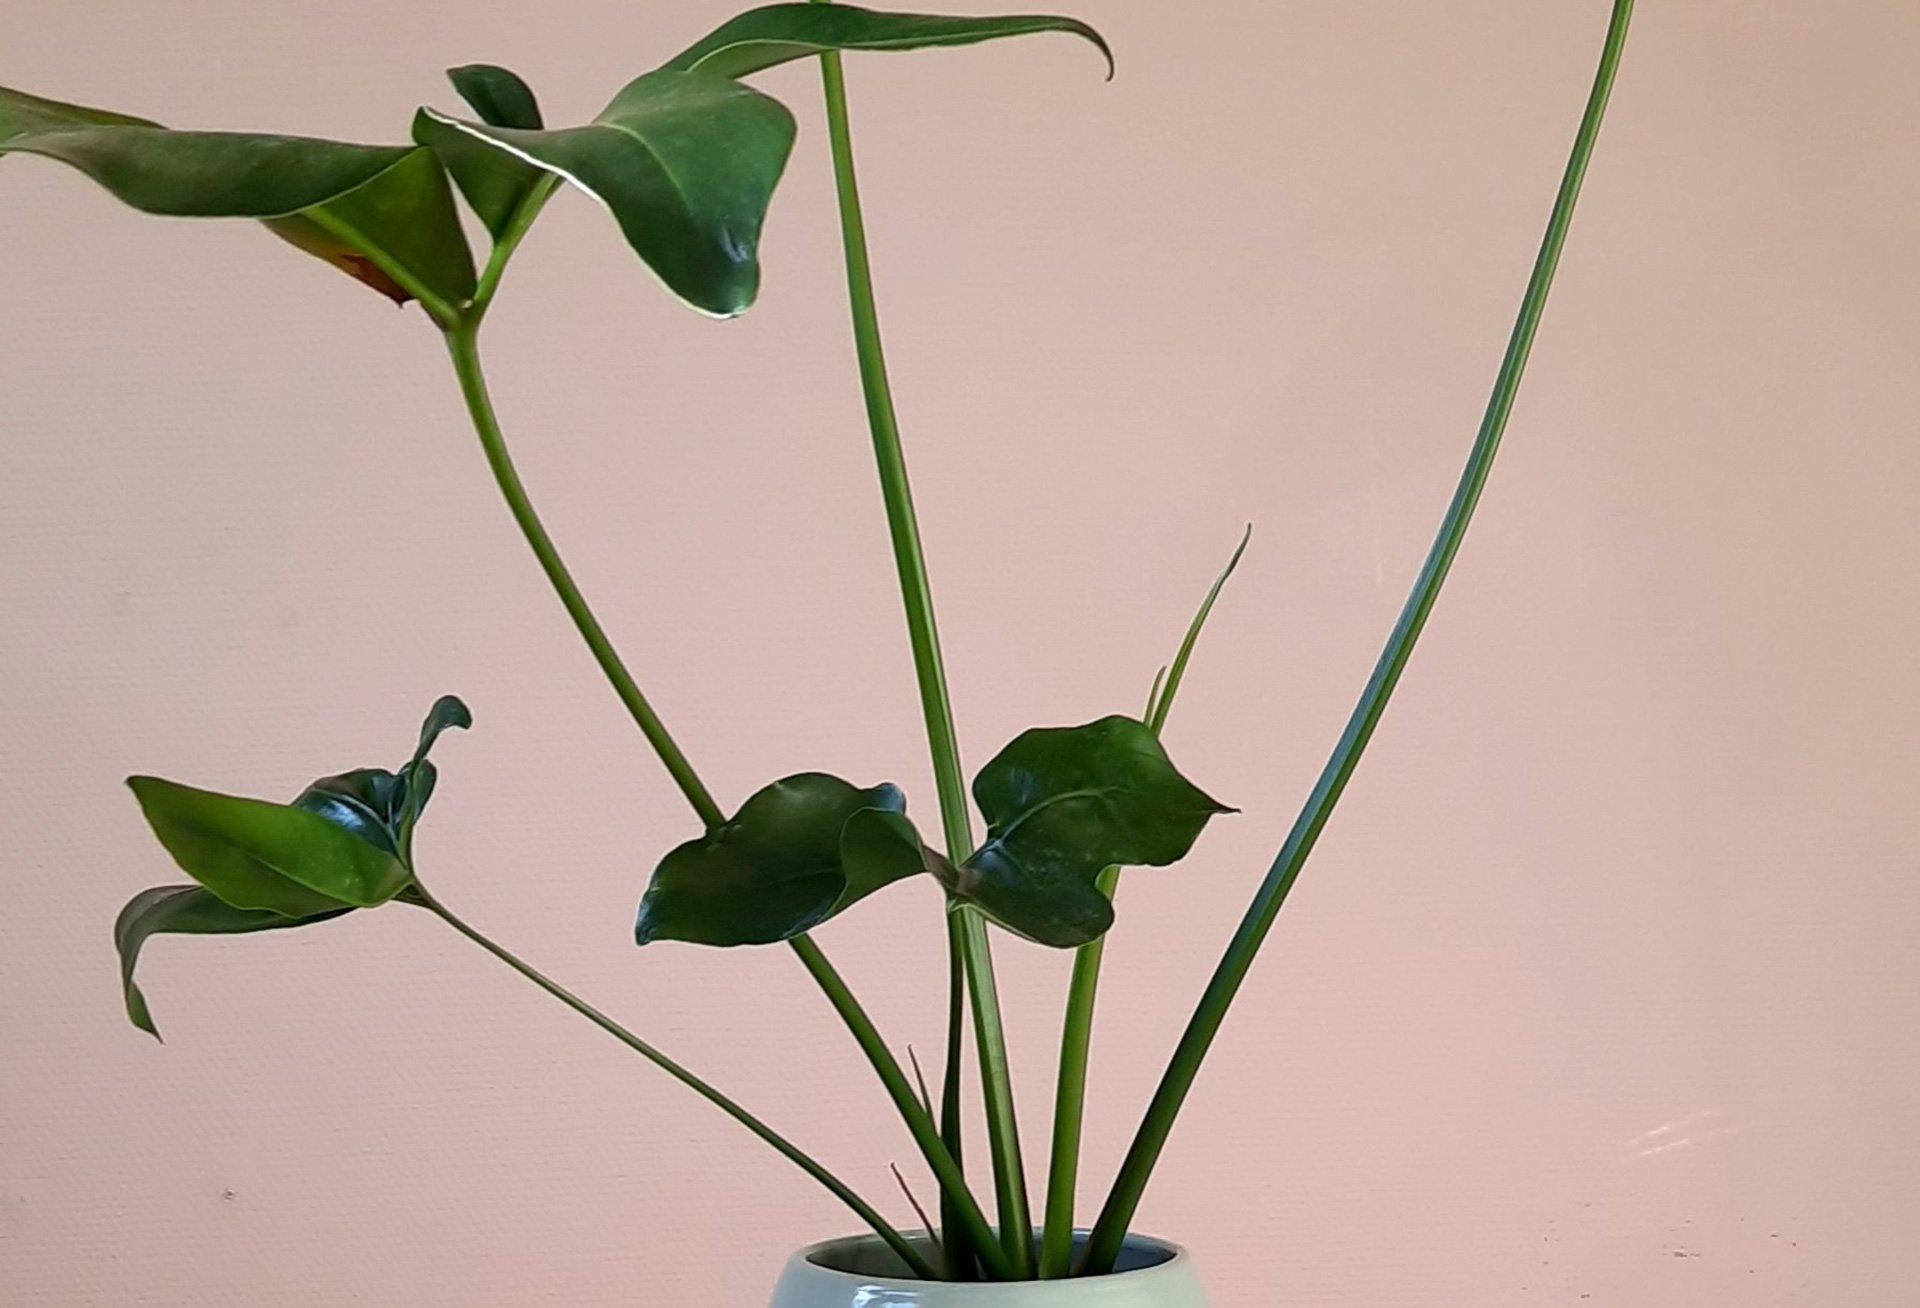 Philodendron Green Wonder - Daily flowers - Plante - Daily flowers